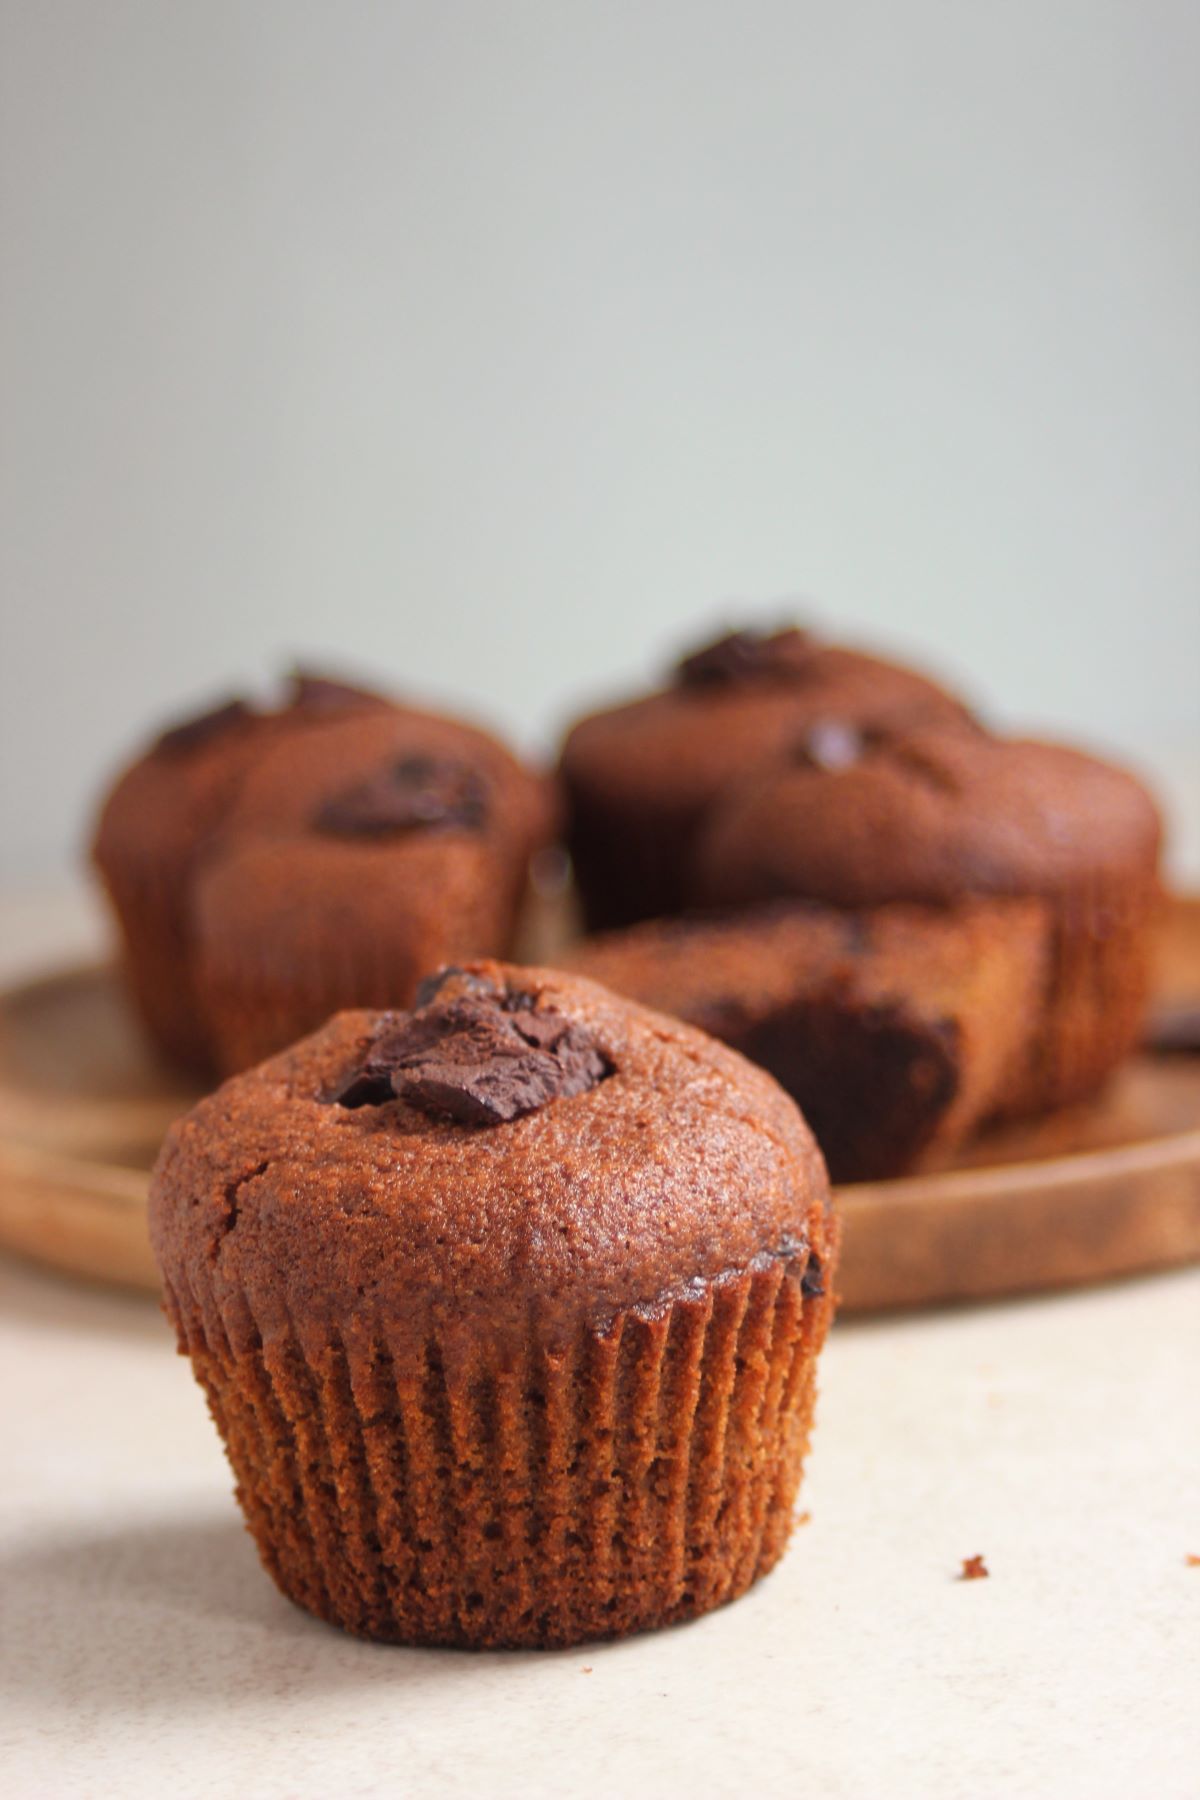 A chocolate banana muffin, and more muffins behind on a wooden plate.